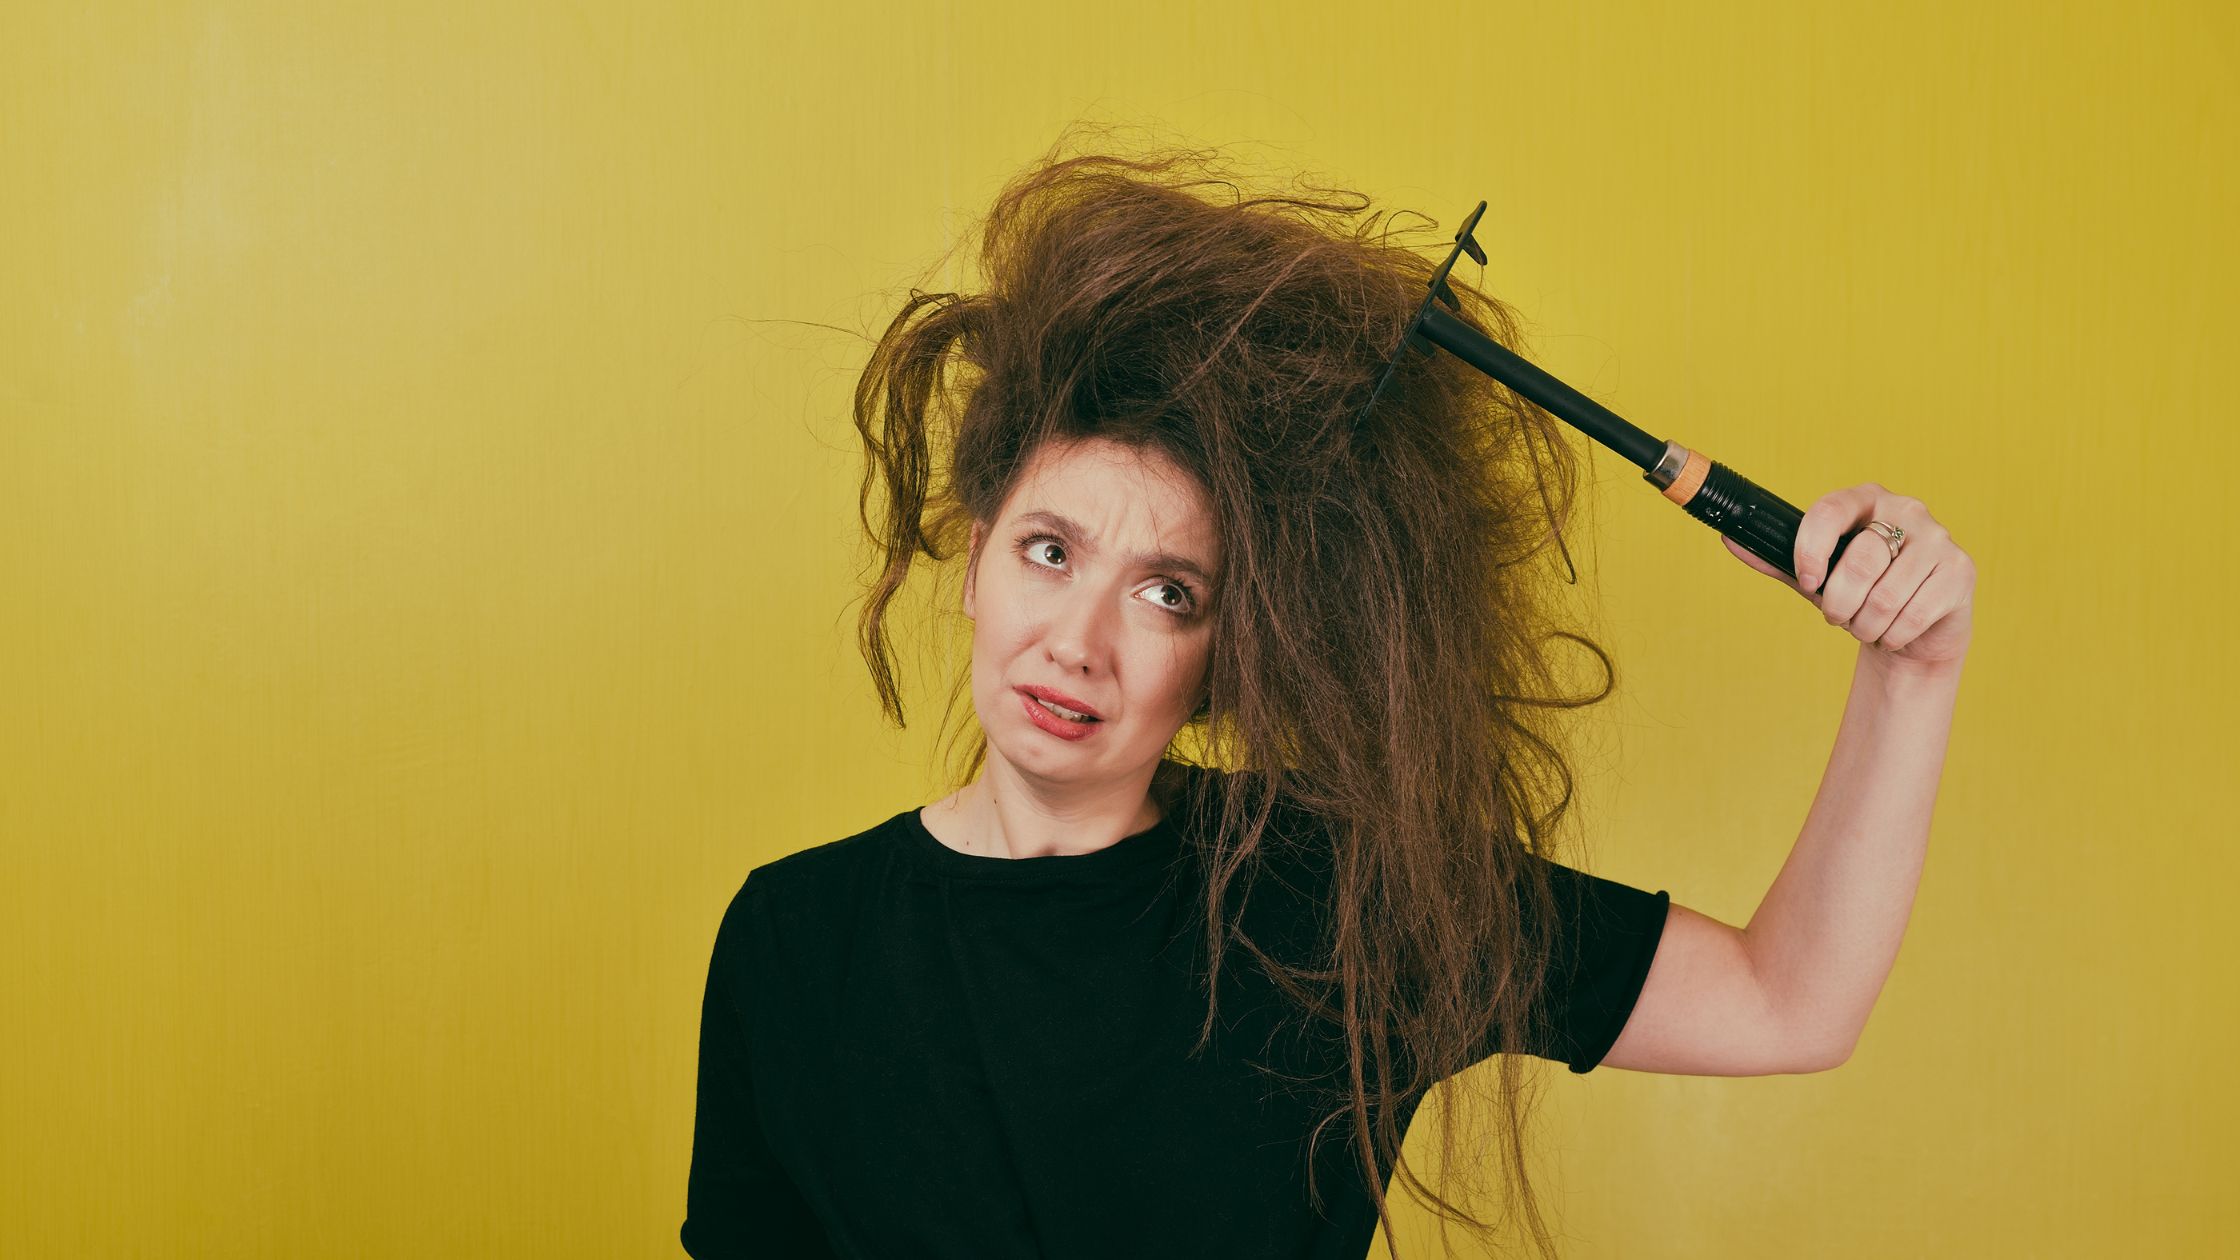 Why is My Hair So Frizzy? 5 Common Causes.